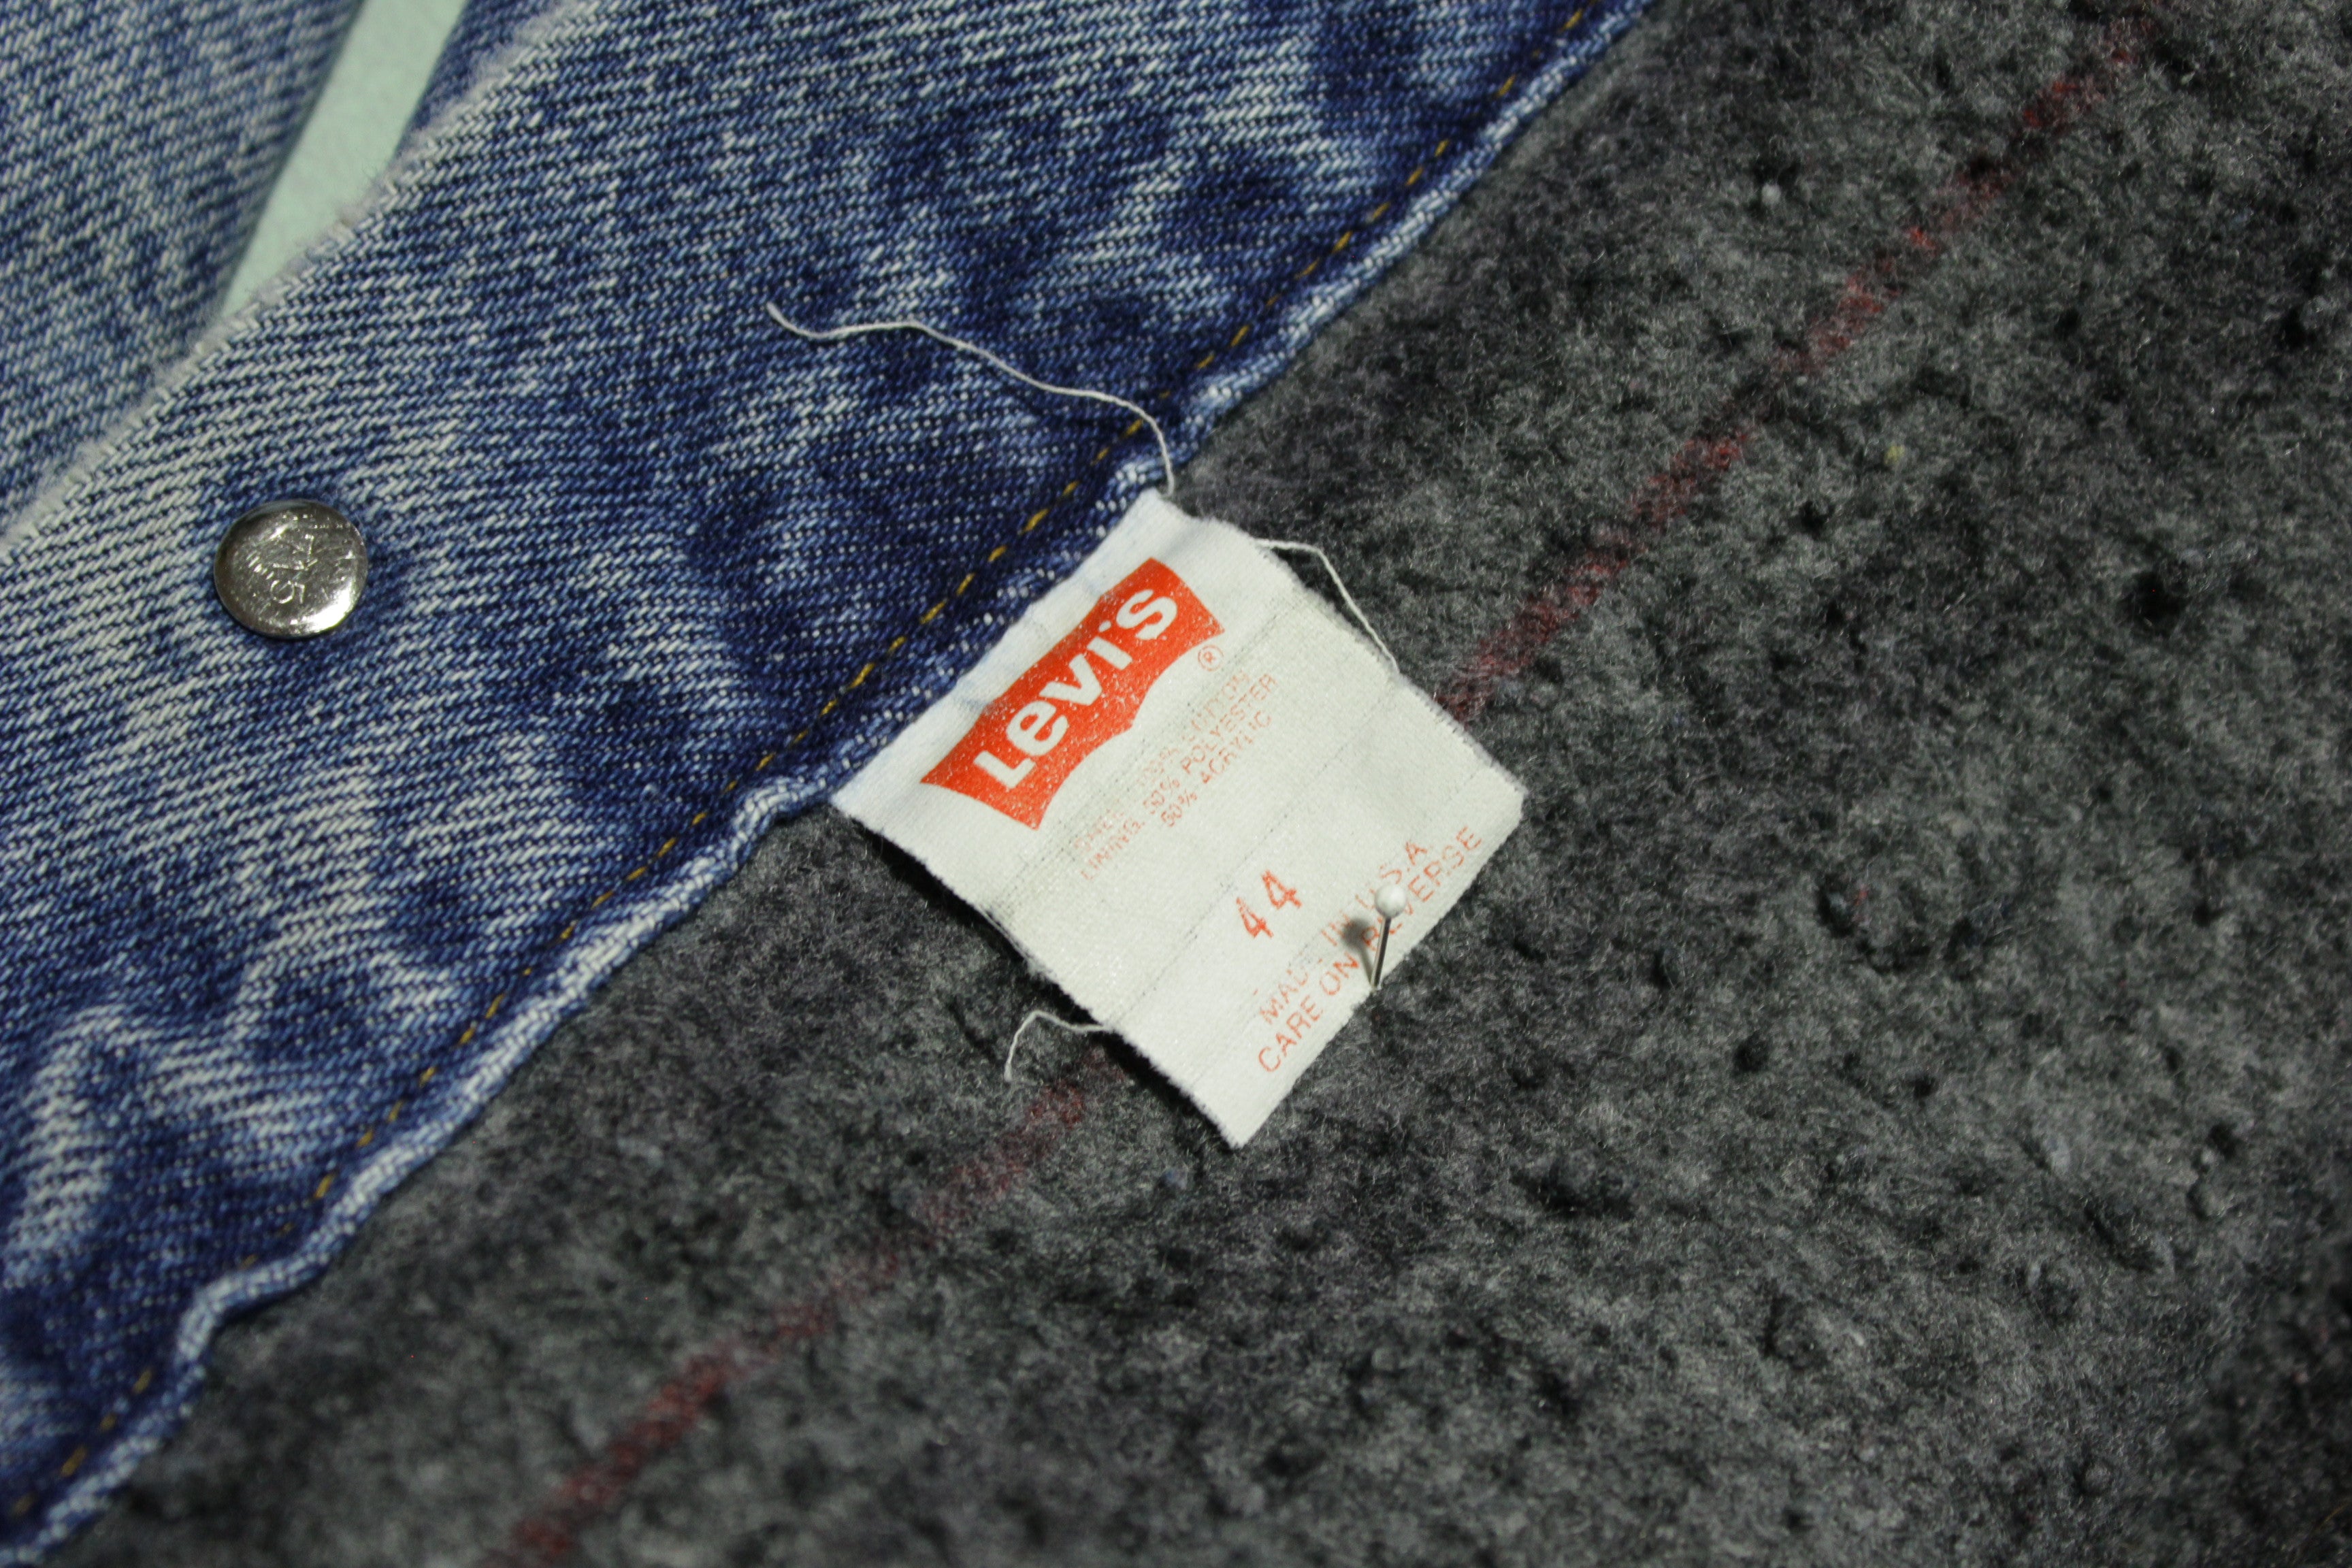 Levis 70506-0316 Blanket Flannel Lined Made in USA Vintage 80s